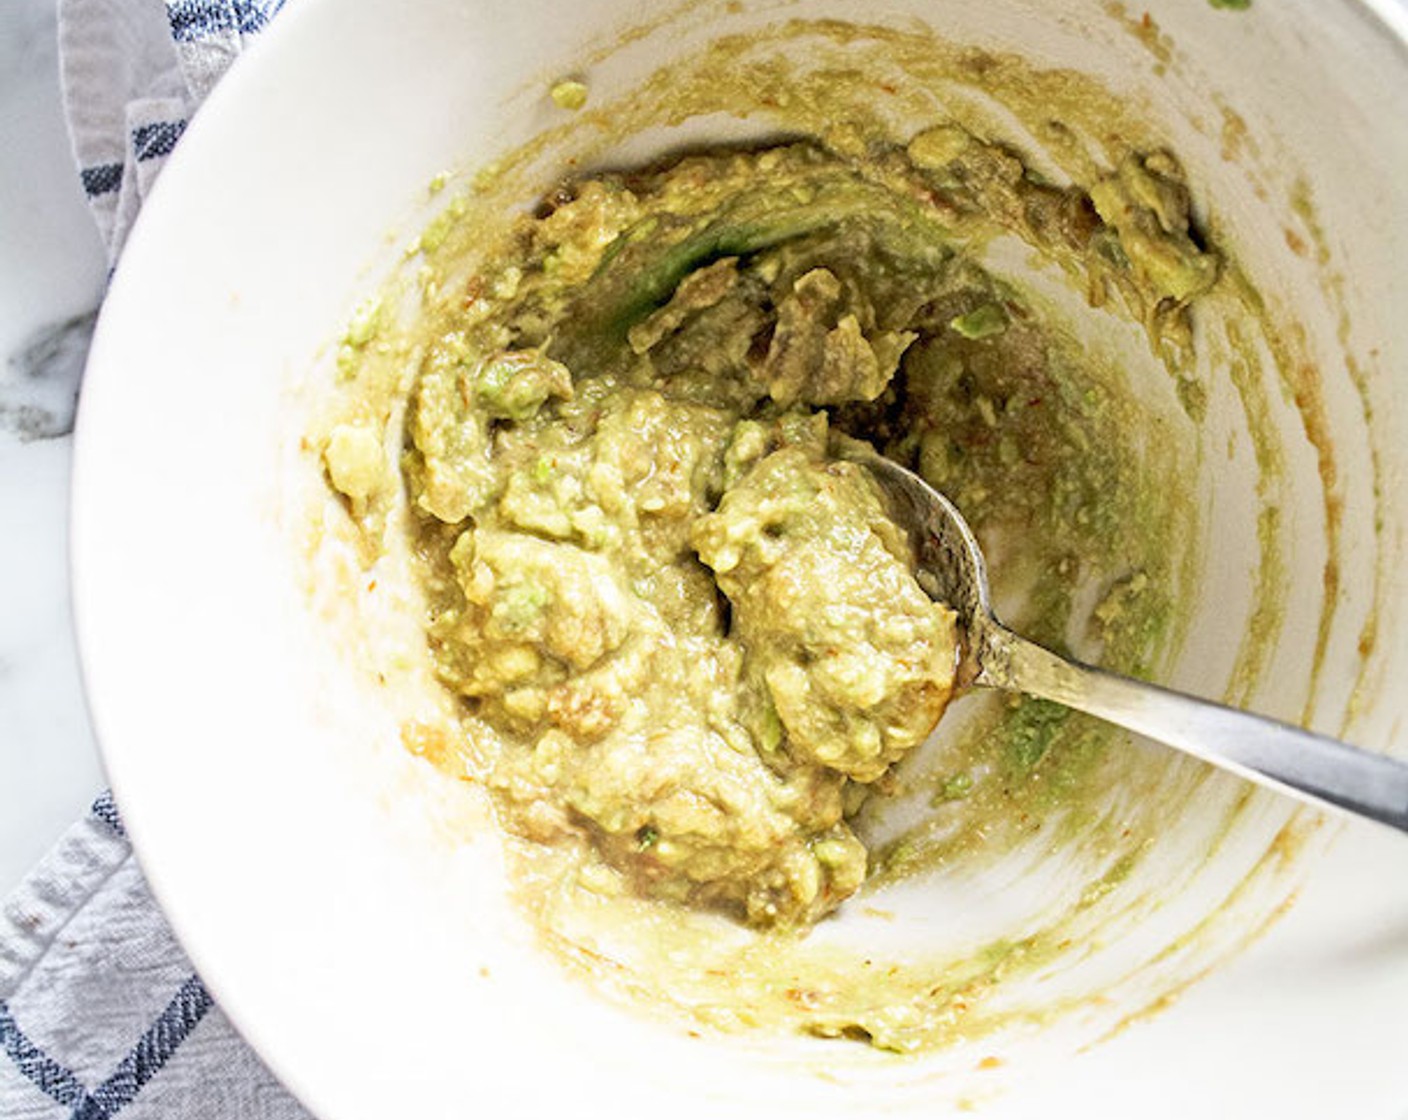 step 1 For the avocado mixture, add Avocado (1/2) to a small bowl along with Salsa (1 Tbsp), mash with the back of a fork until well combined, then set aside.